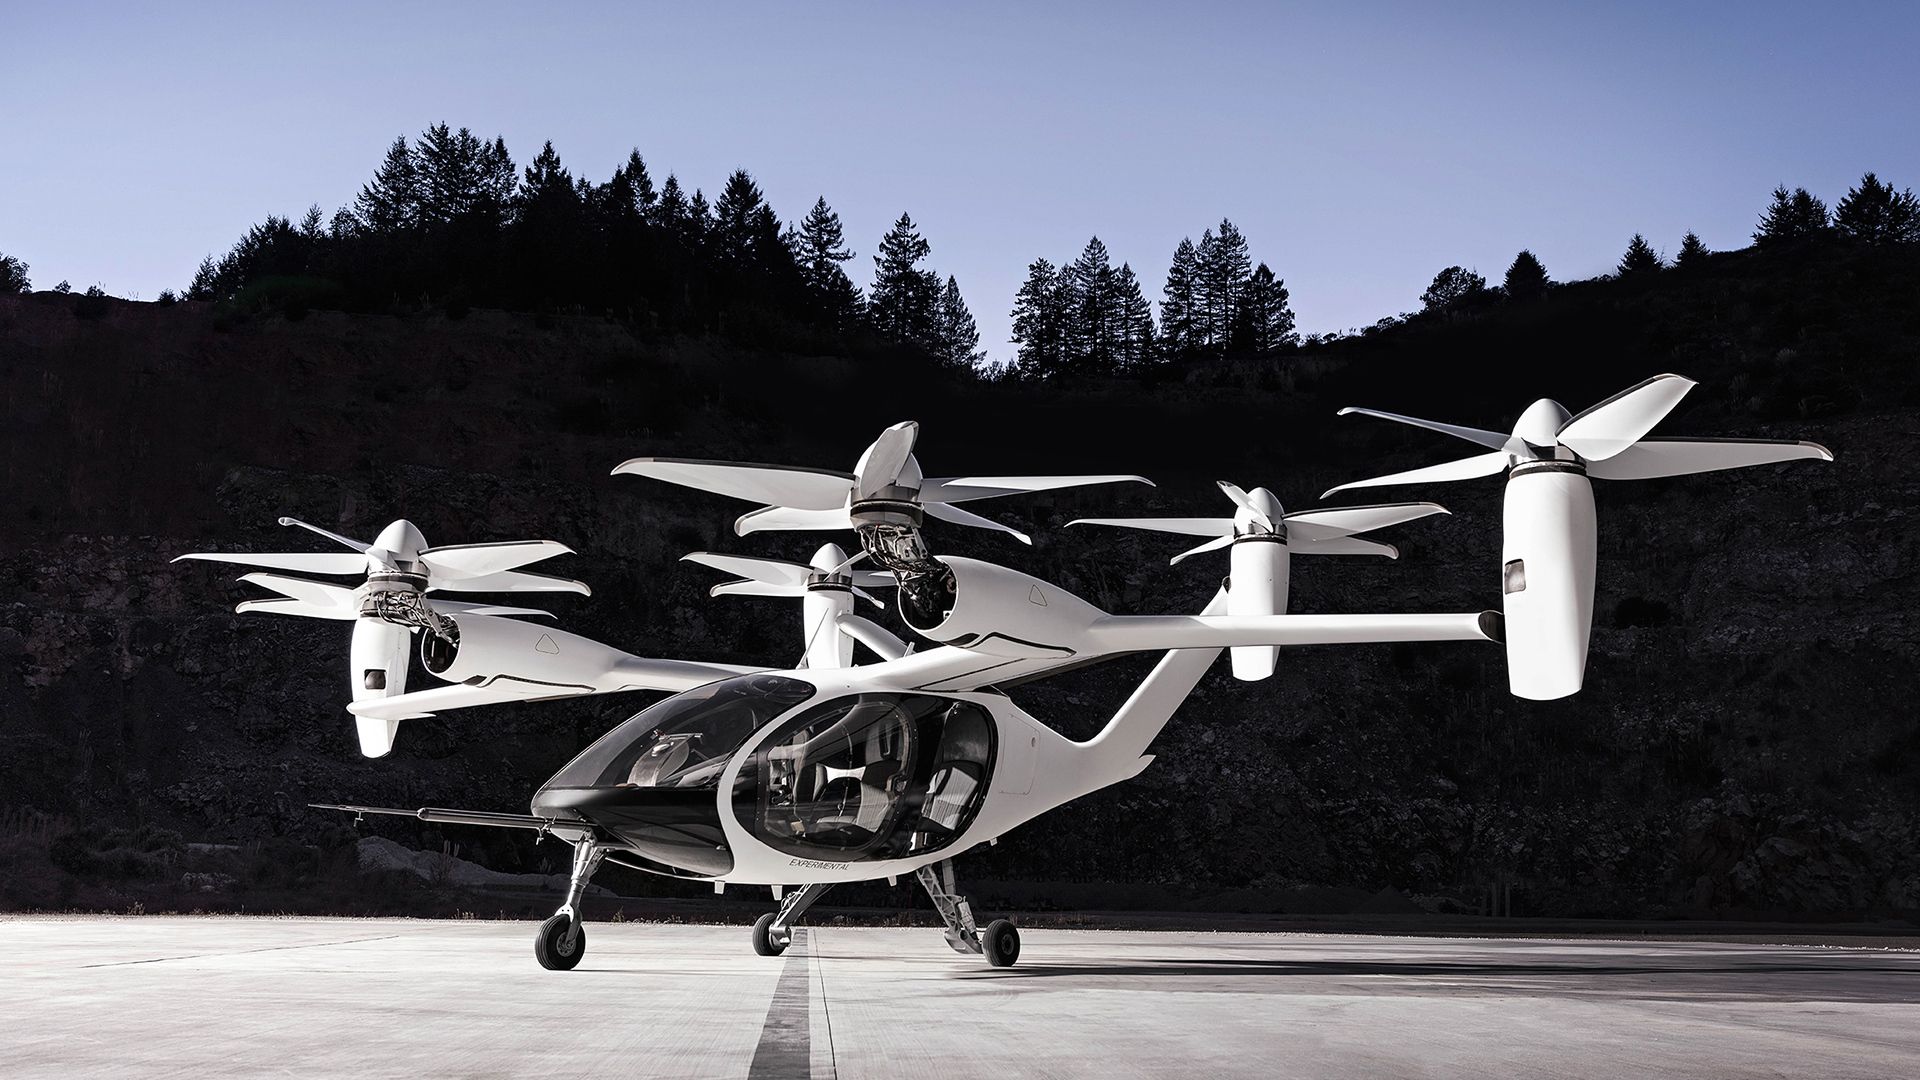 Image of Joby Aviation's multi-rotor air taxi, which looks like a drone crossed with a helicopter